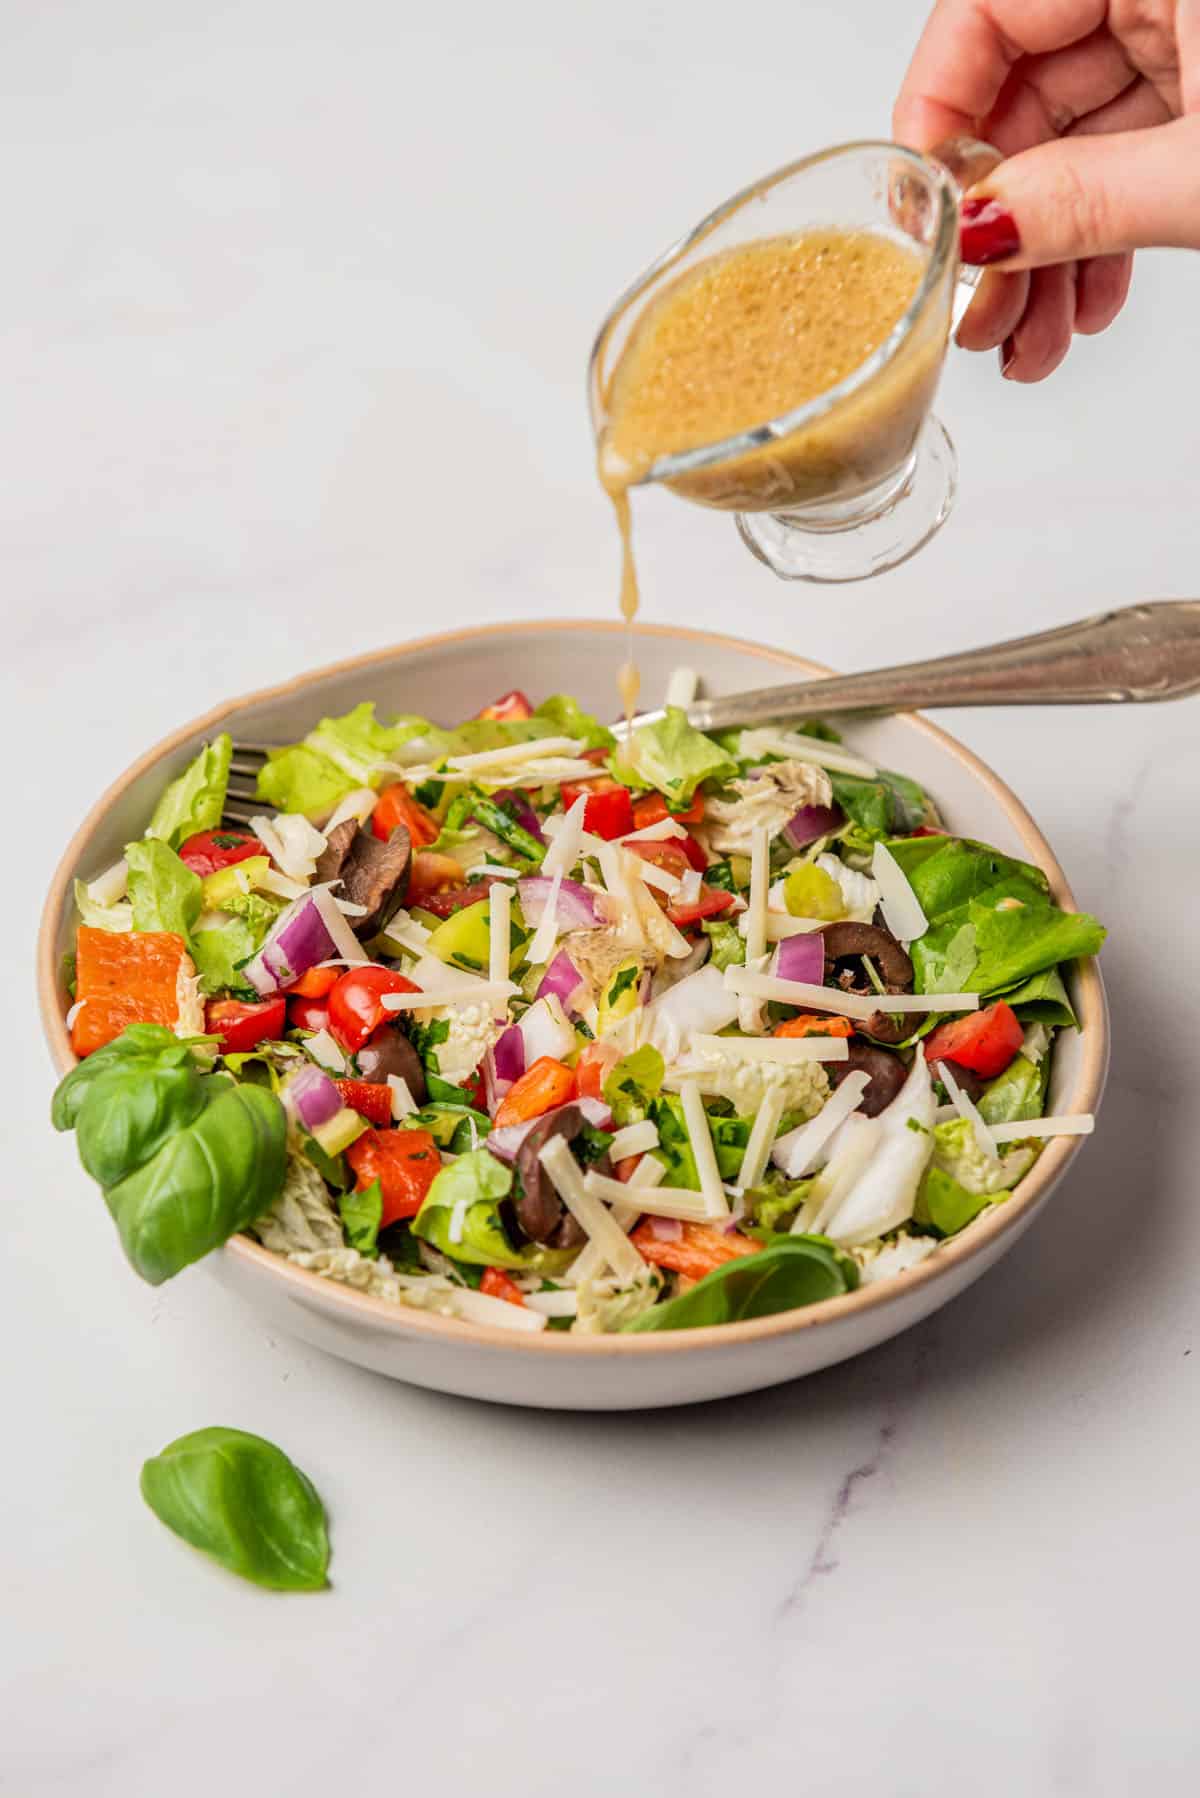 An image of an Italian chopped salad with champagne vinaigrette dressing, in a serving plate.